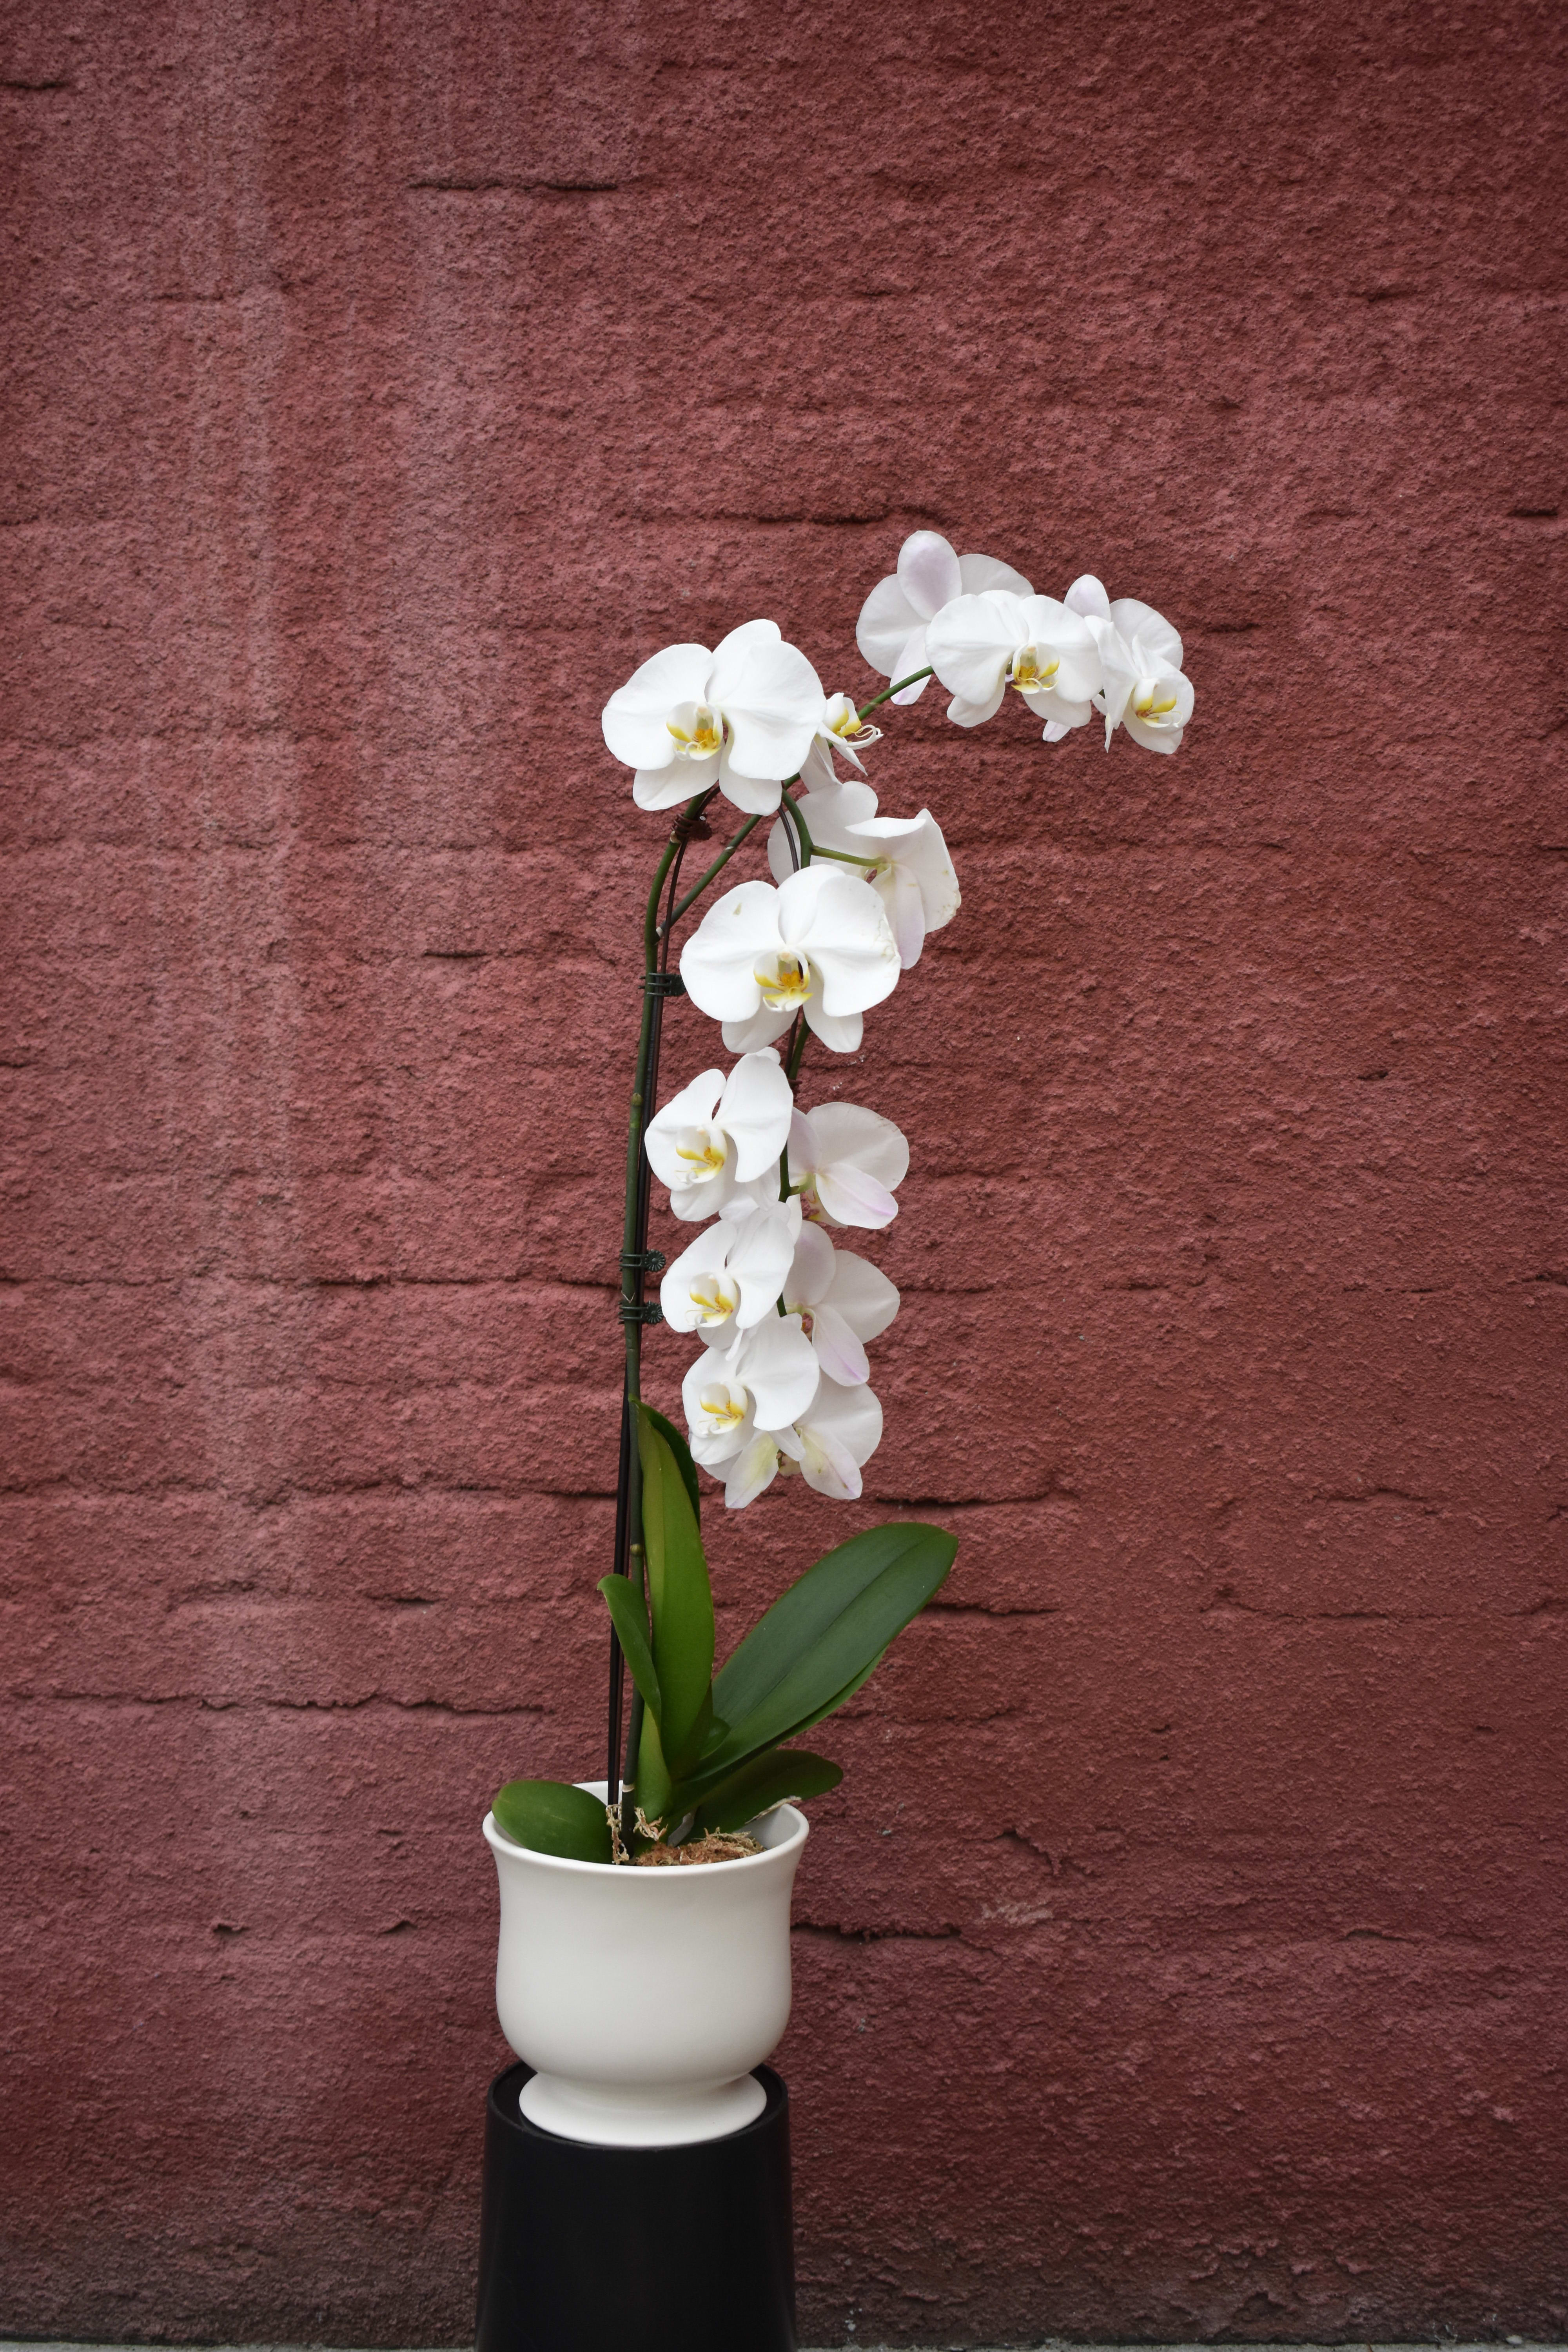 White Orchid Planter - &quot; White Orchid Planter is an elegant, long-lasting gift that  beautifully conveys any sentiment. A snow-white  phalaenopsis orchid plant displays its exotic blooms while seated in a  designer white ceramic container. 6&quot;&quot; pot-sized, Plant&quot; Height can vary, and is approximately 18&quot; or taller. Please call us at 320-587-3110 if specific measurements are needed. 